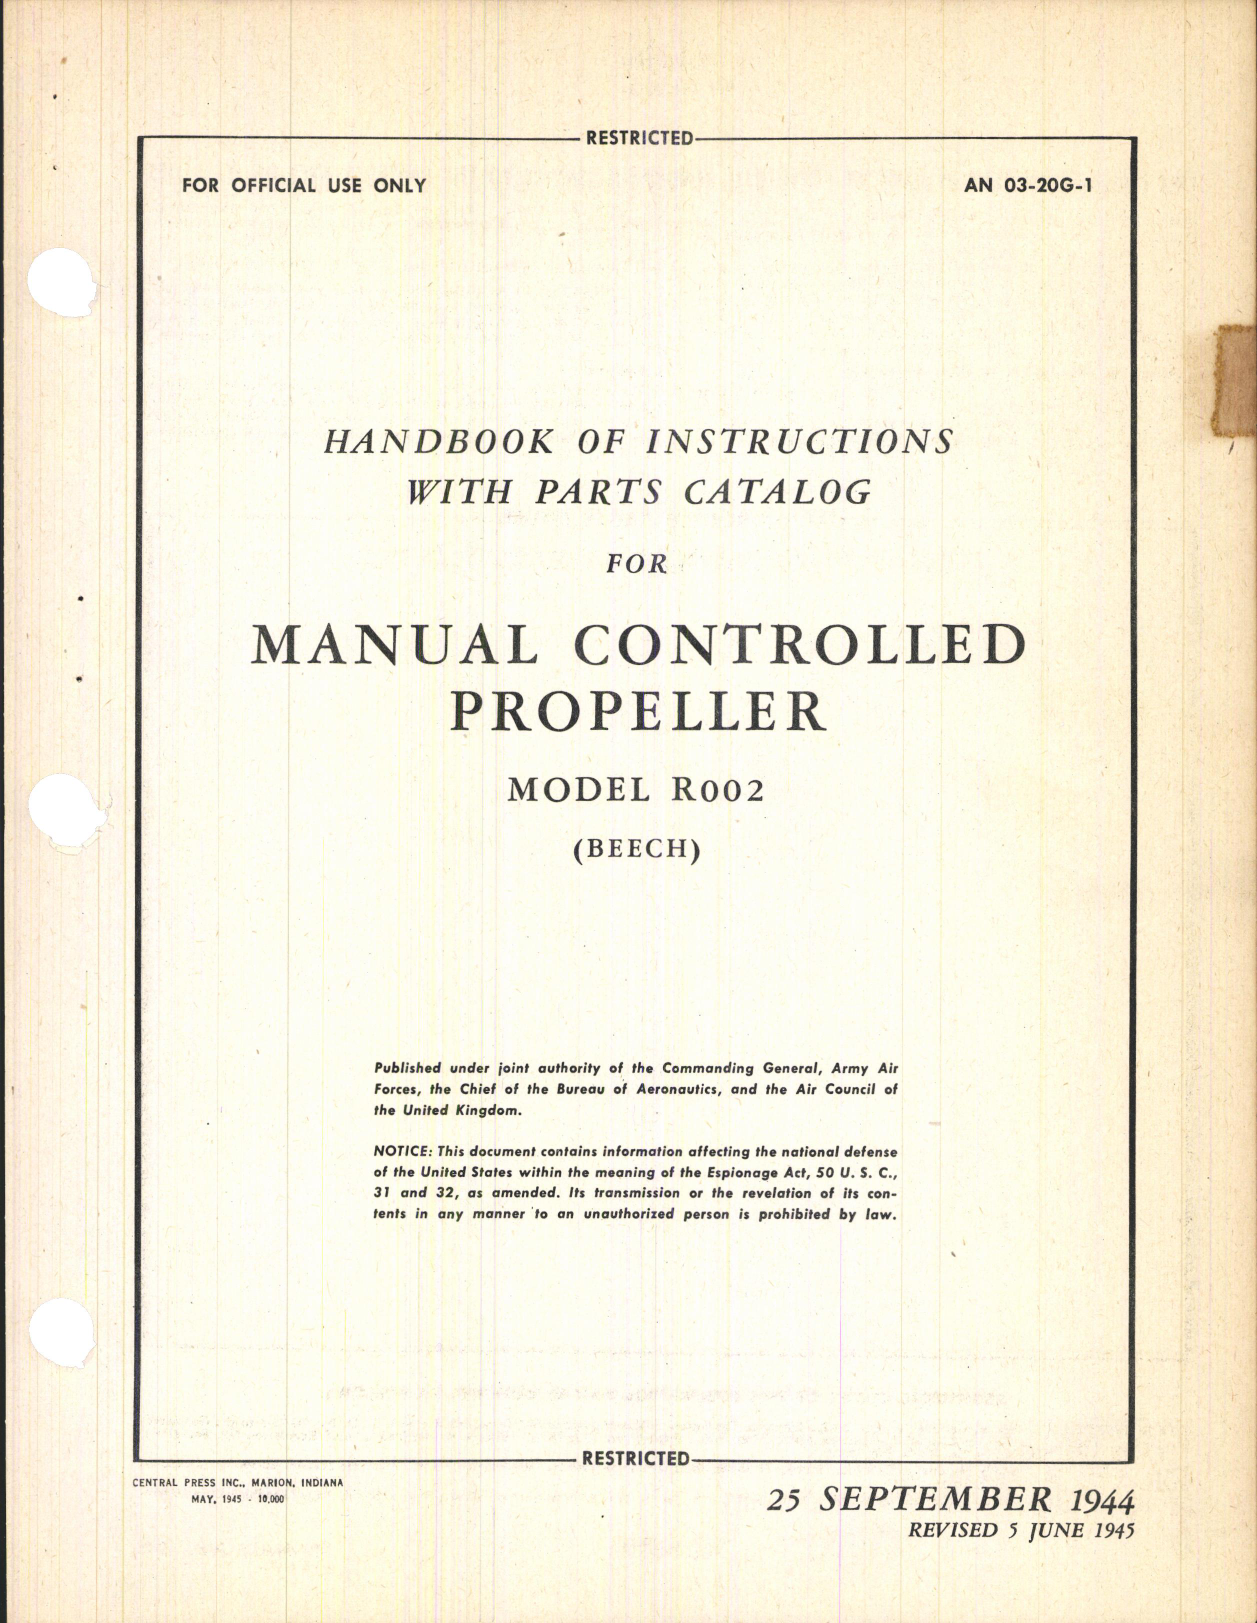 Sample page 3 from AirCorps Library document: Handbook of Instructions with Parts Catalog for Manual Controlled Propeller Model R002